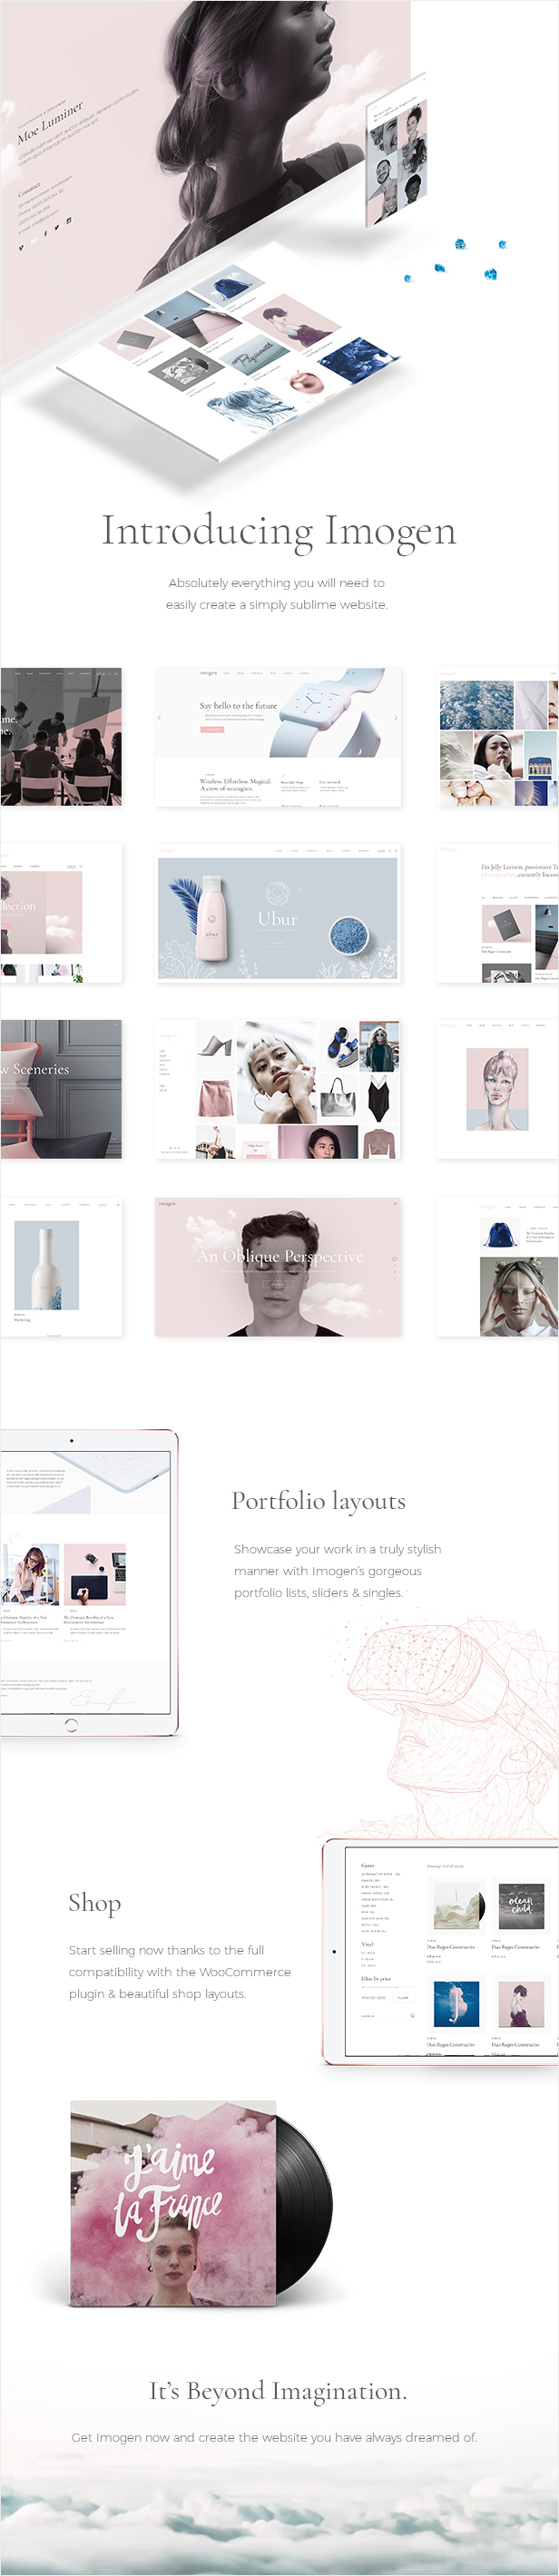 Imogen - Theme for Designers and Creative Businesses - 1